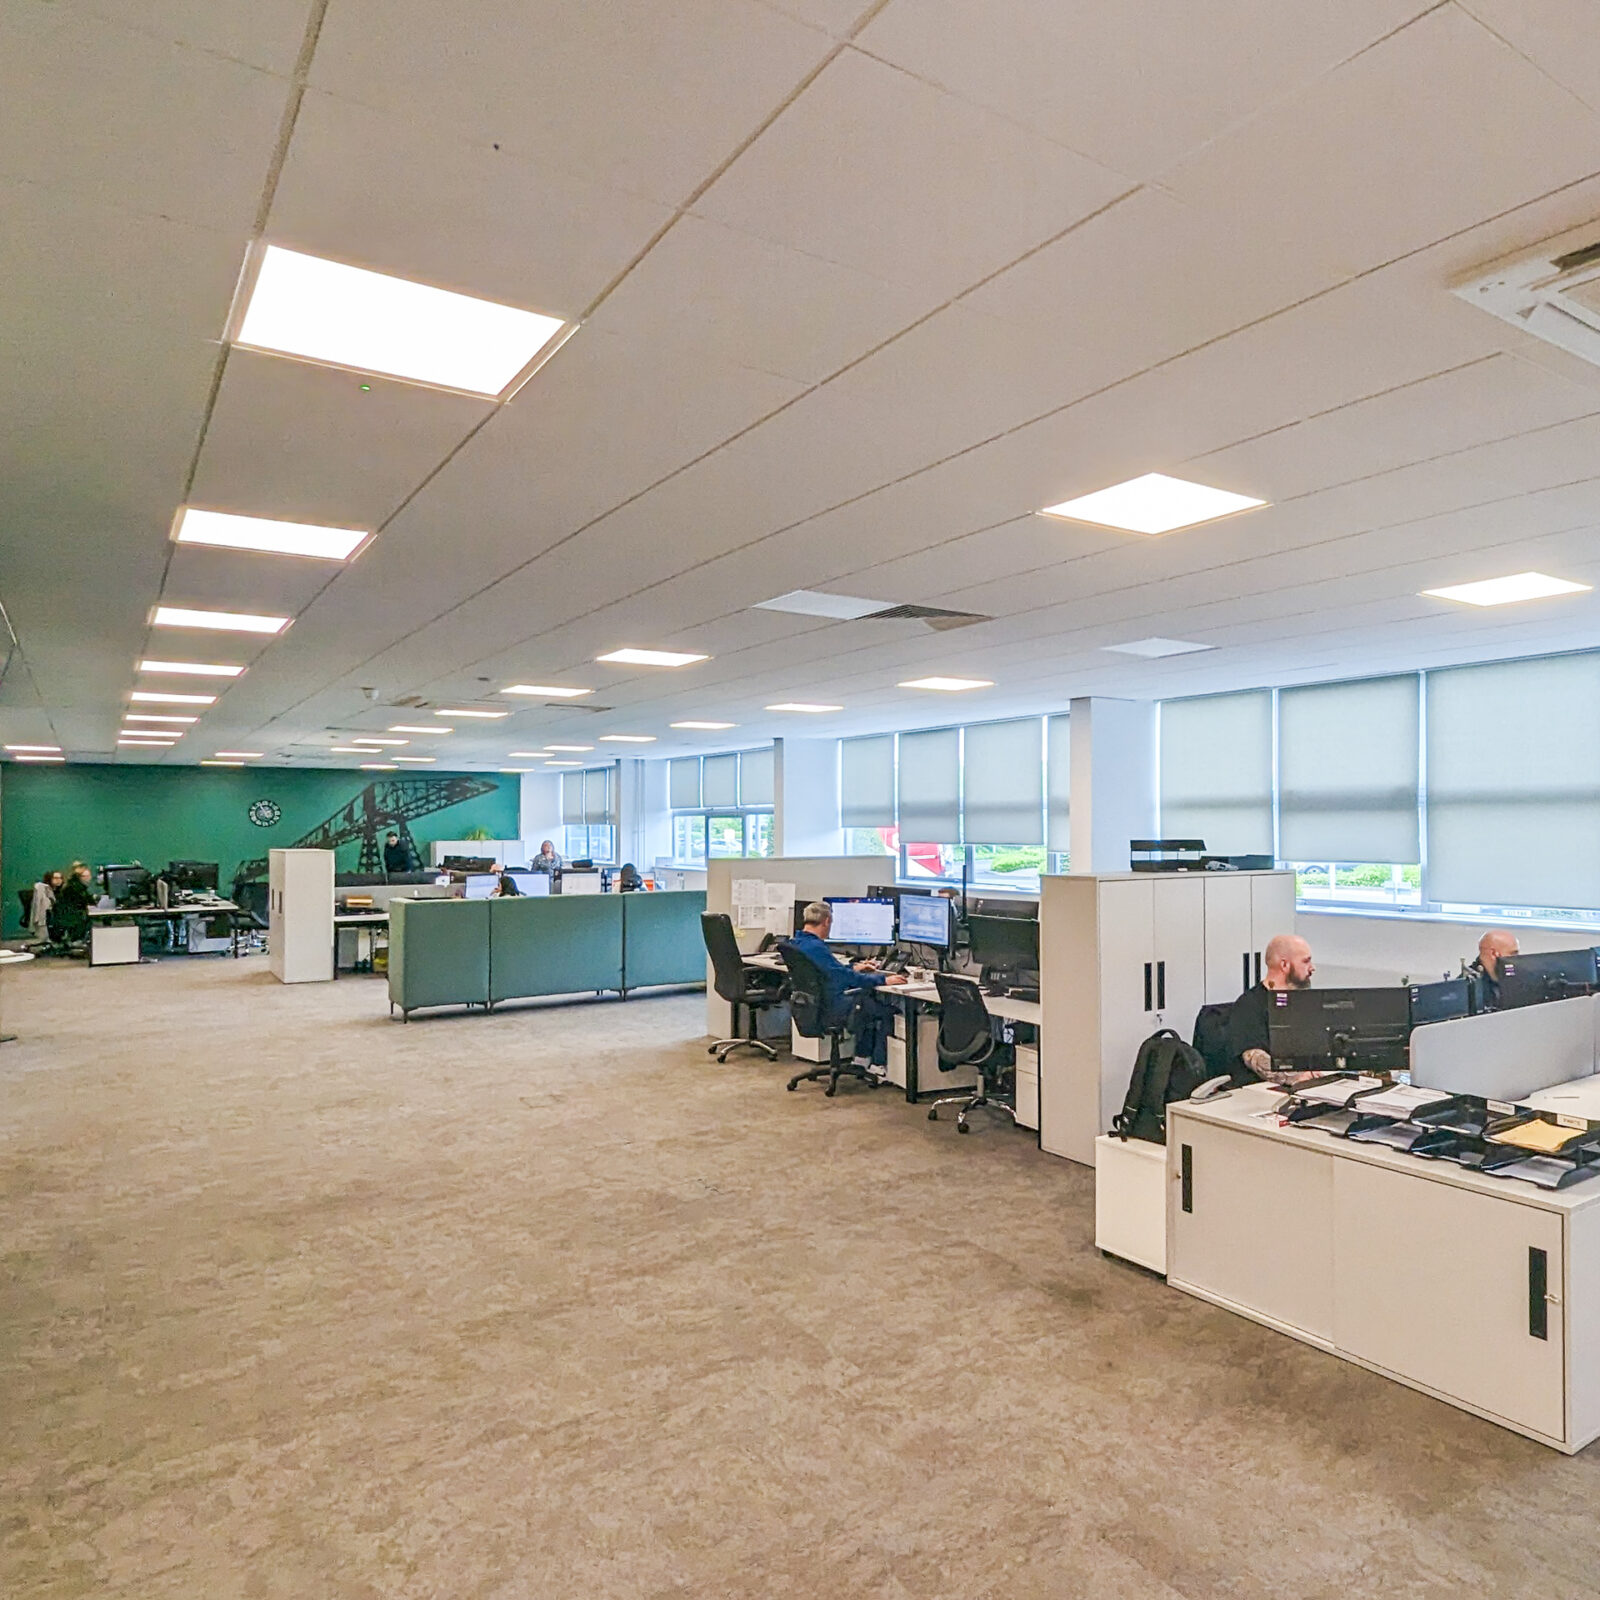 Korniche sales and quotes team collaborating in a bright and modern office environment. Join our team and build a rewarding career.